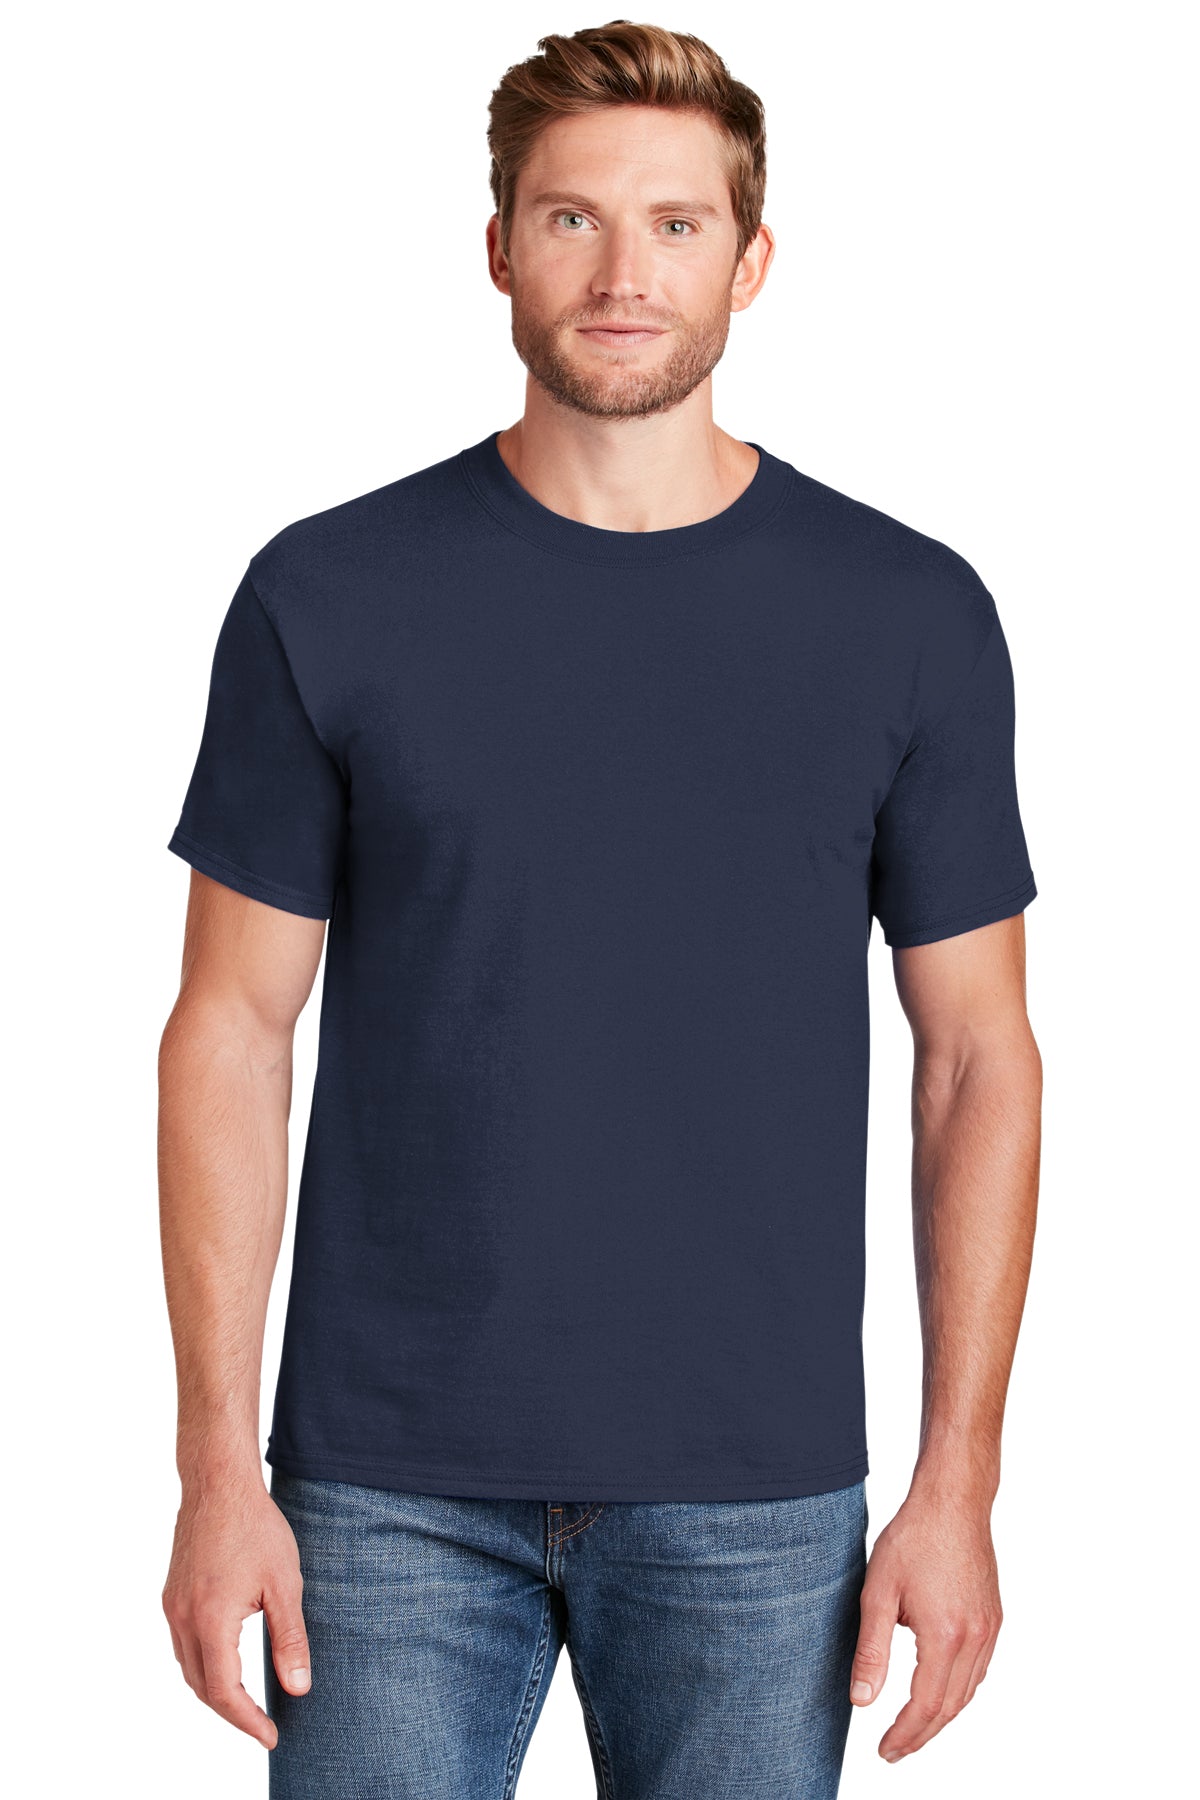 Hanes® Beefy-T® - 100% Cotton T-Shirt